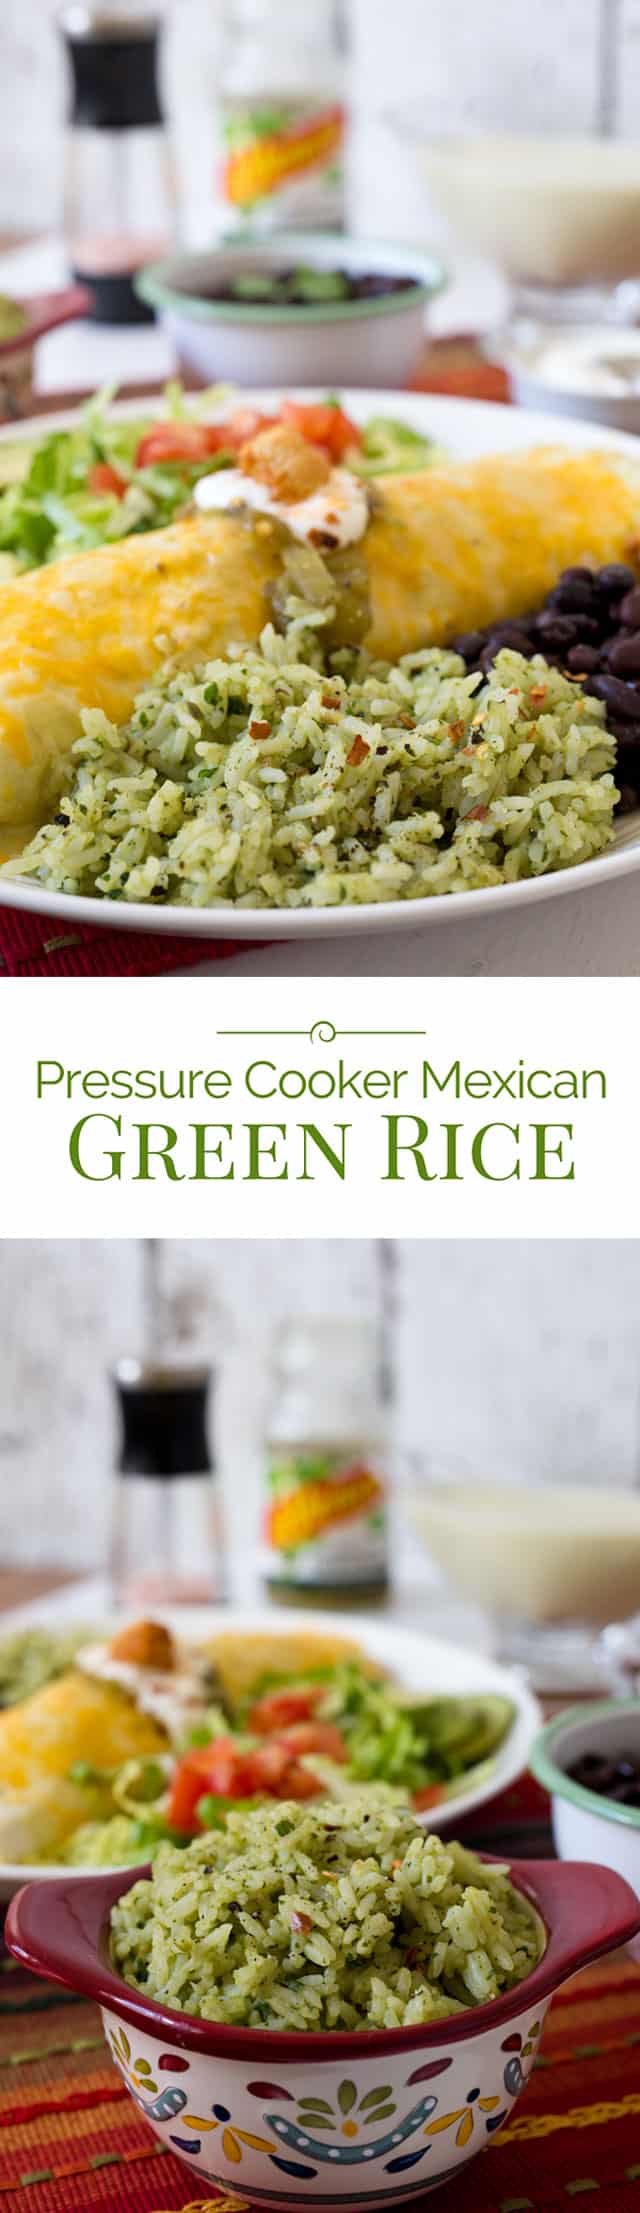 Pressure-Cooker-Mexican-Green-Rice-collage